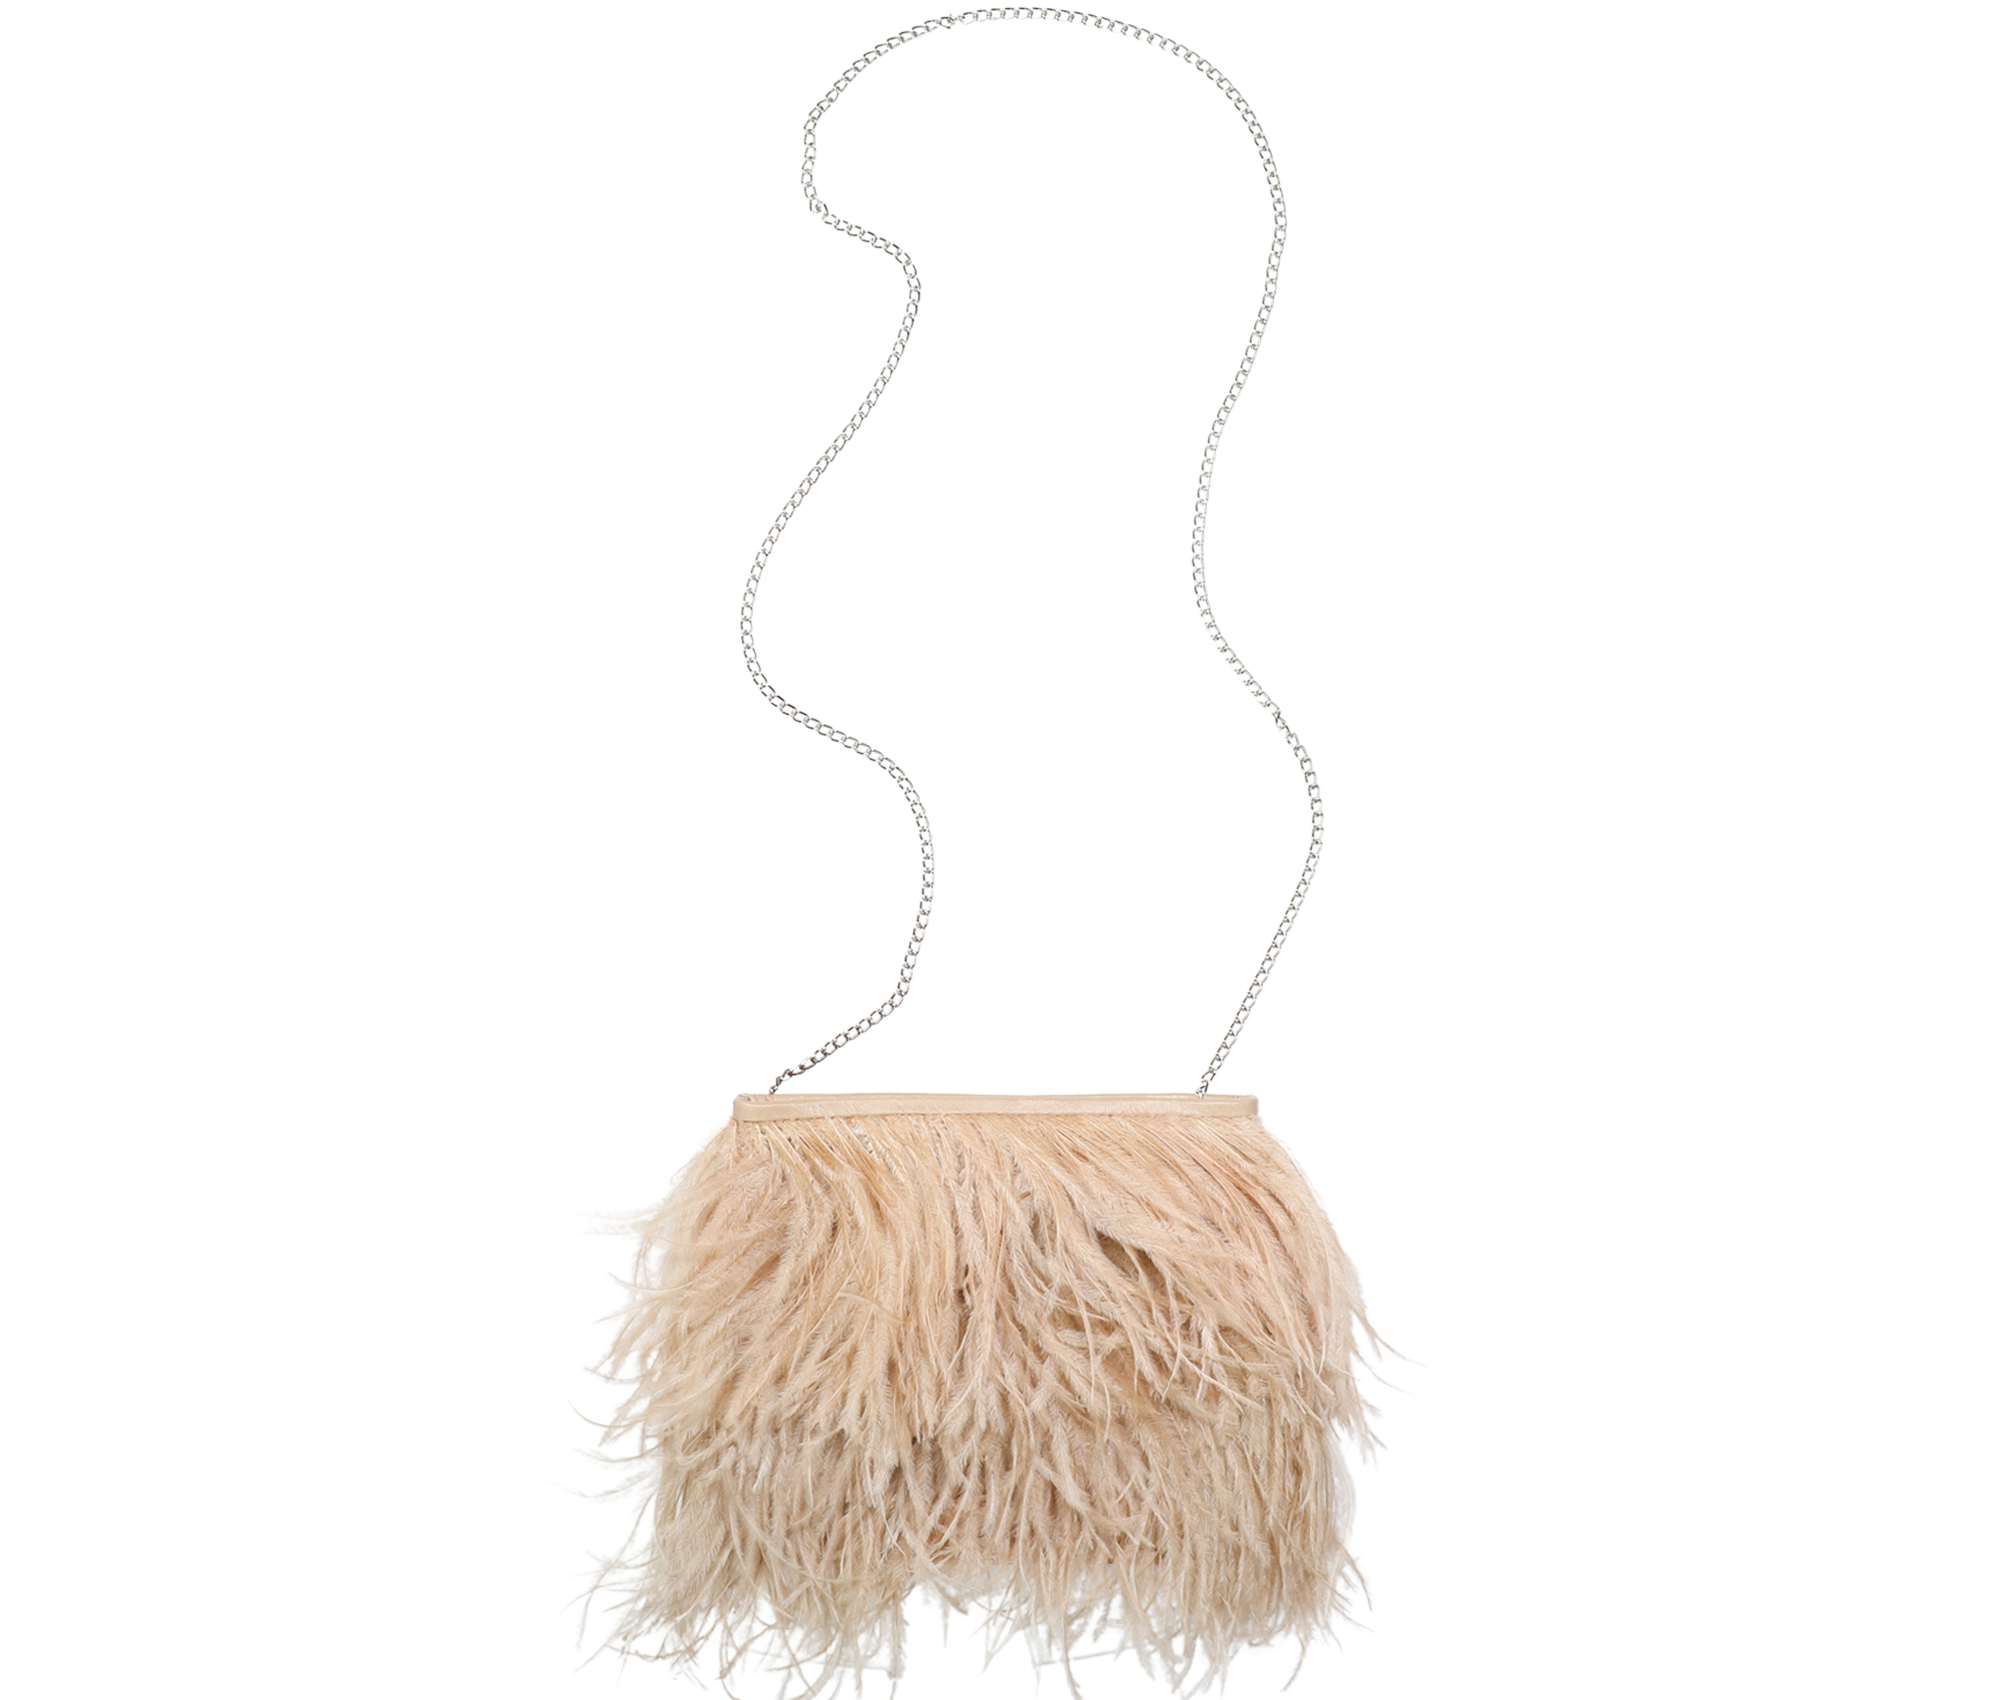 Ostrich Feather Bag Made in South Africa - KEENTU